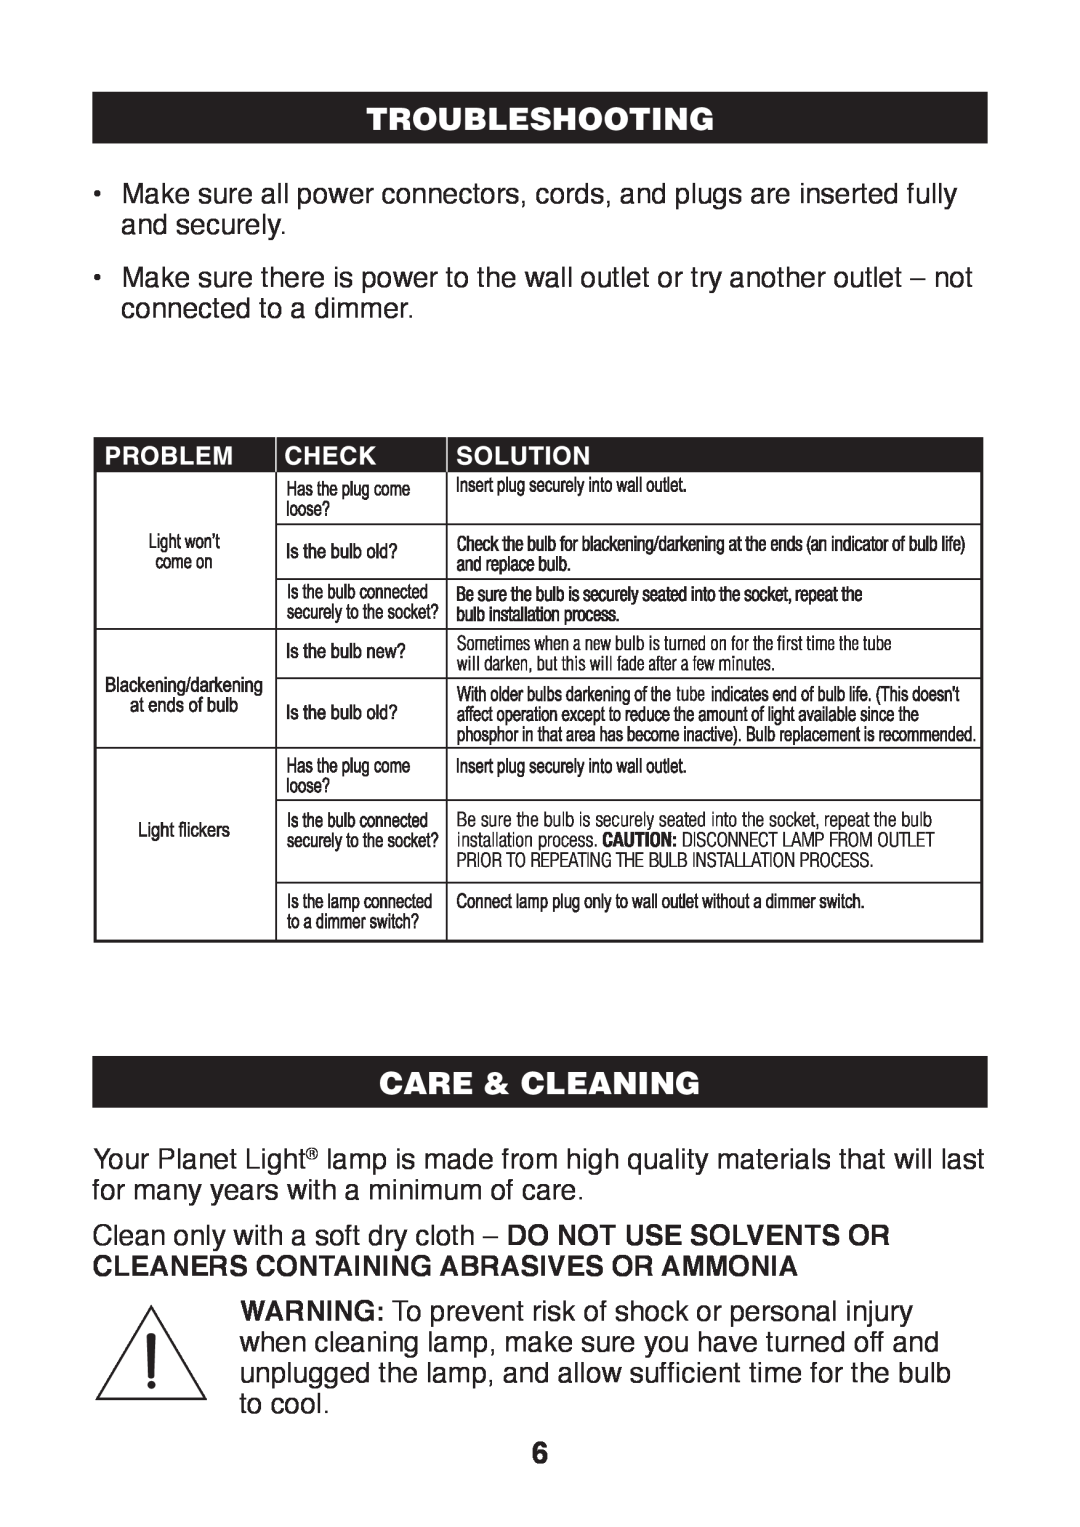 Verilux PL03 manual Troubleshooting, Care & Cleaning, Cleaners Containing Abrasives Or Ammonia 